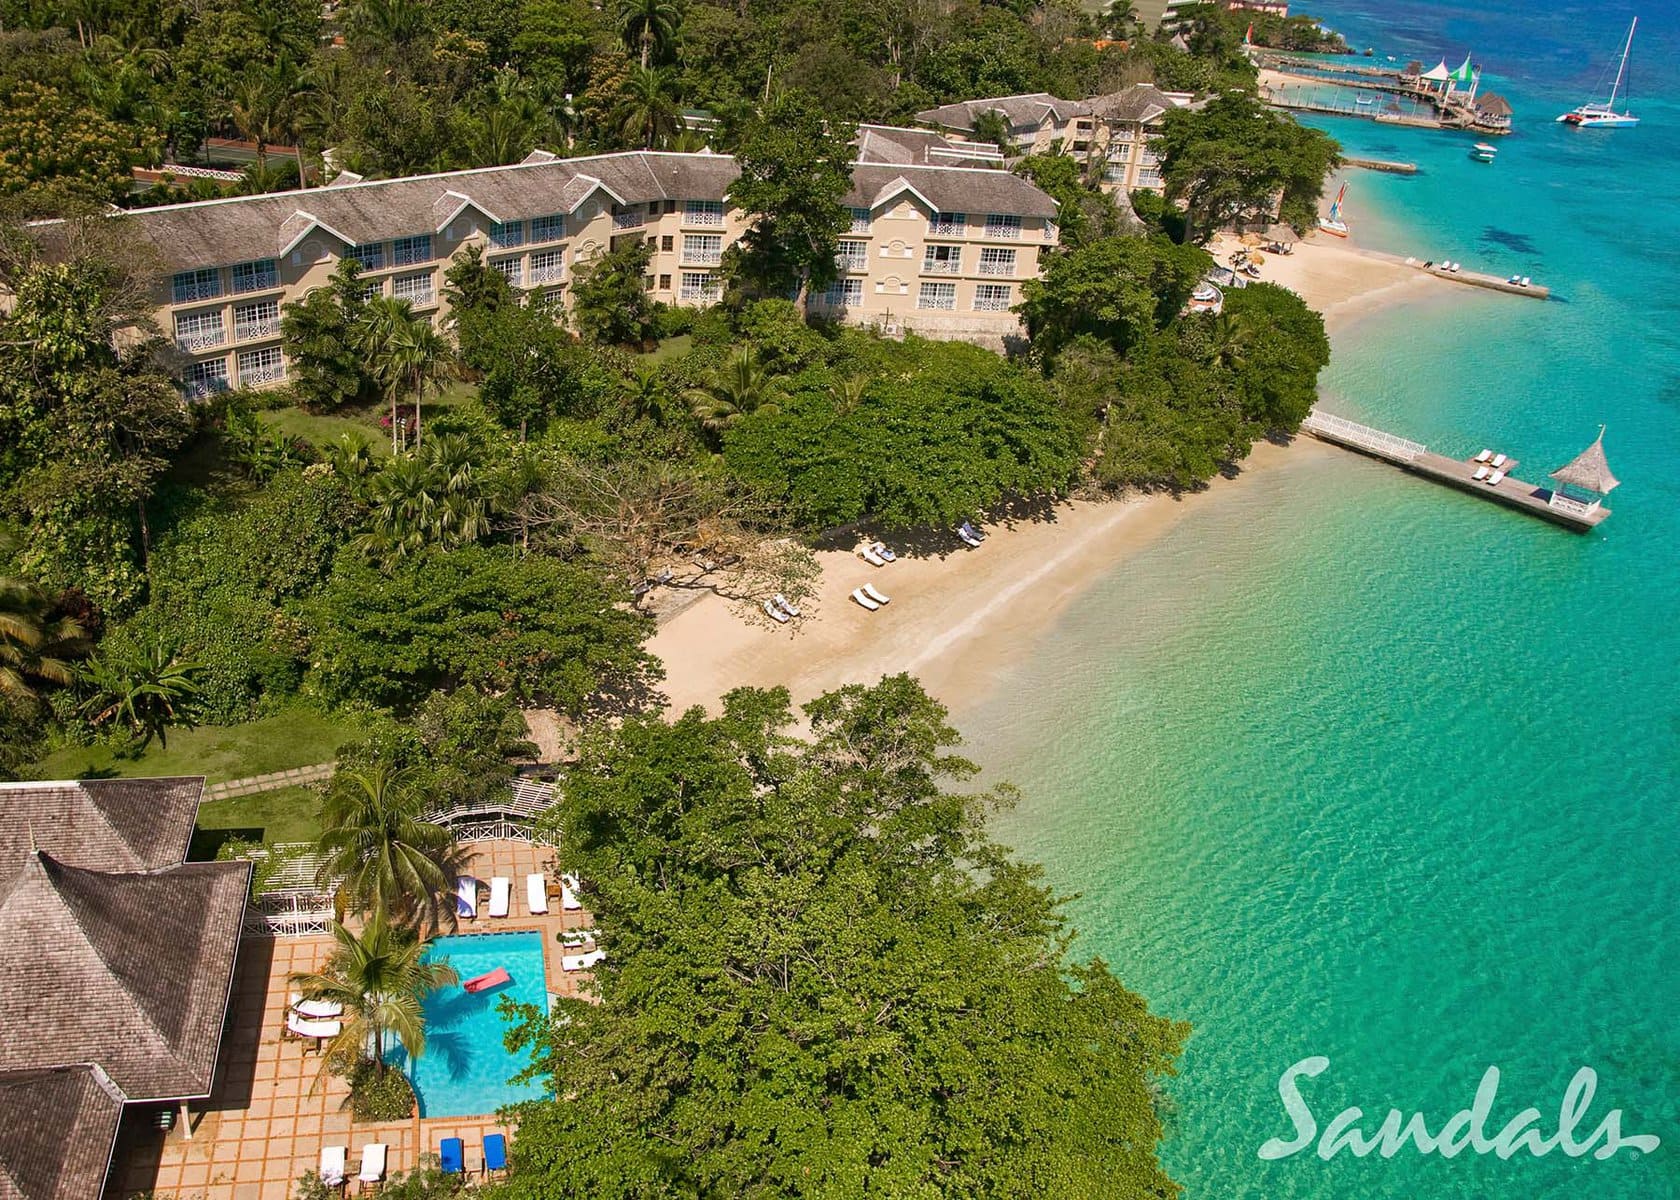 Sandals Royal Plantation Beach is one of the best sandals resorts in jamaica